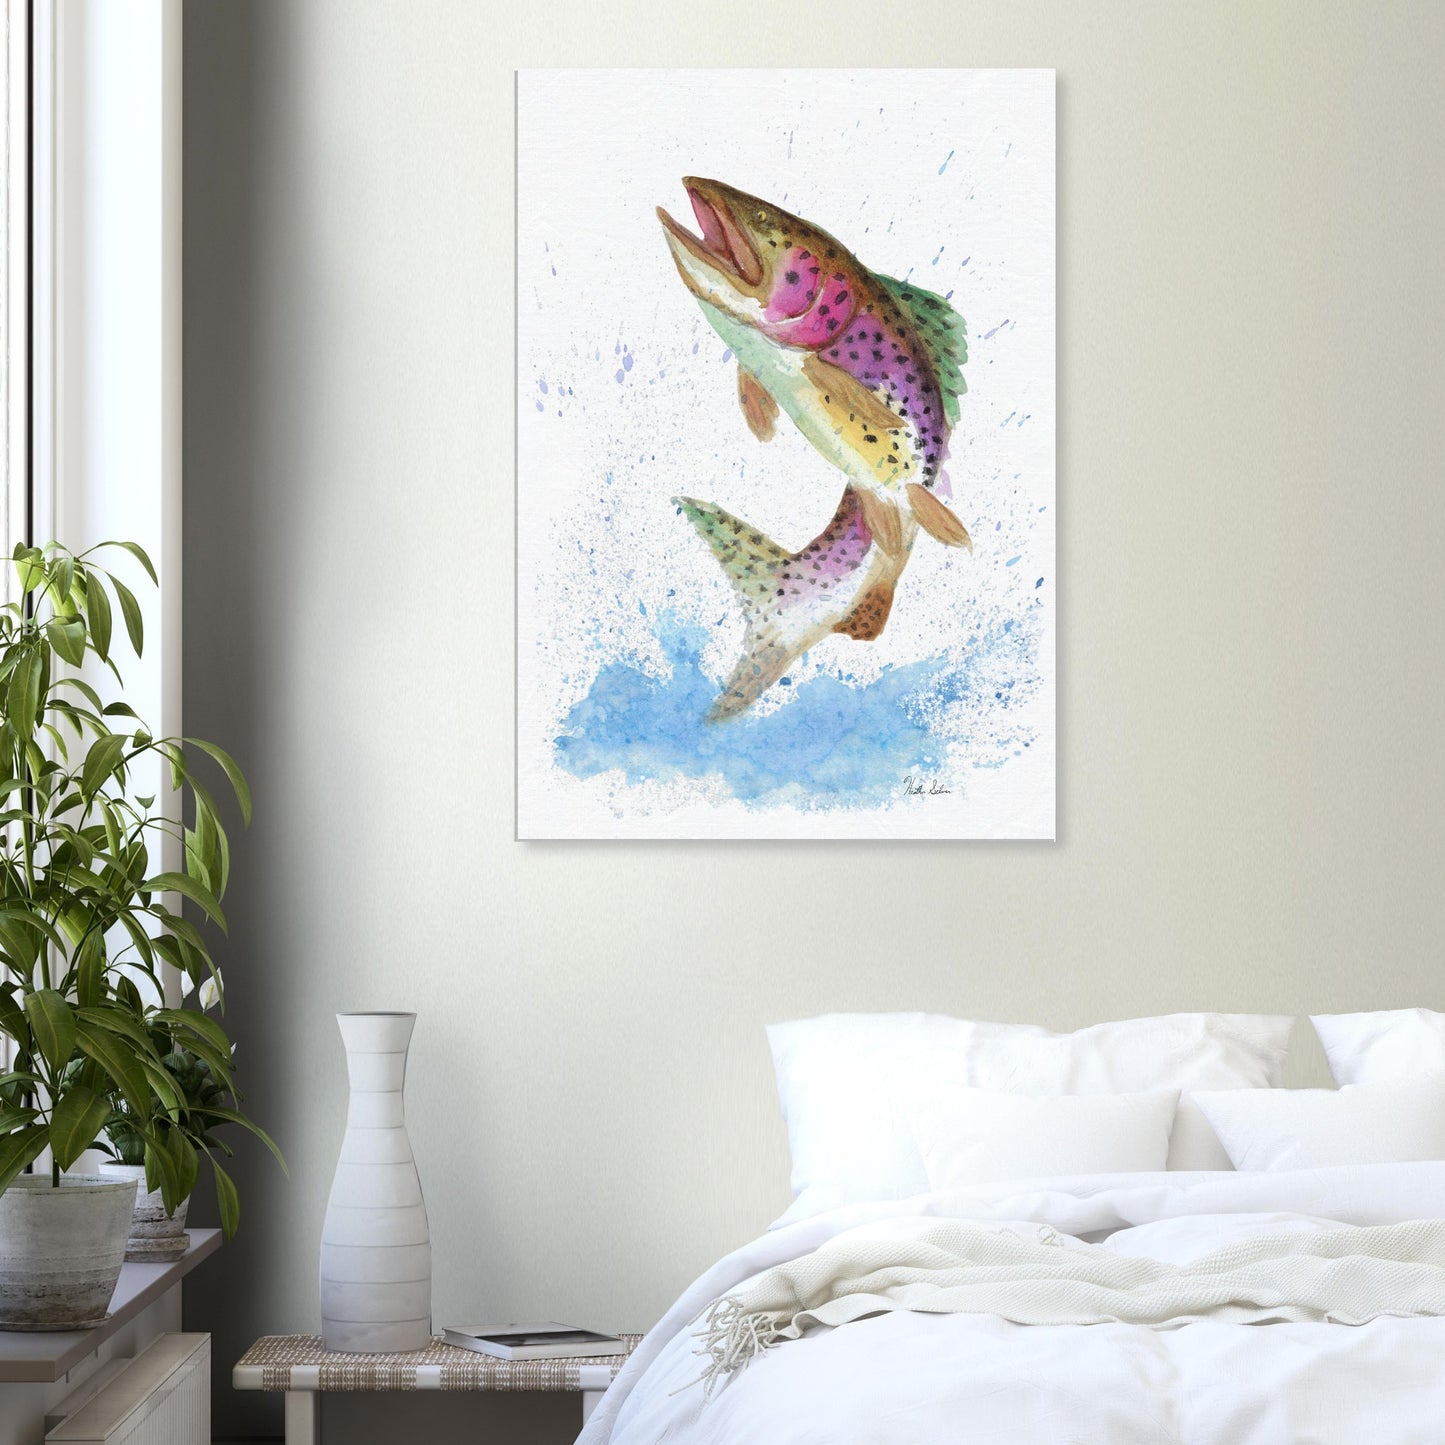 28 by 40 inch slim canvas wall art print featuring a watercolor painting of a rainbow trout leaping from the water. Shown on wall above white bed, end table, and potted plant.